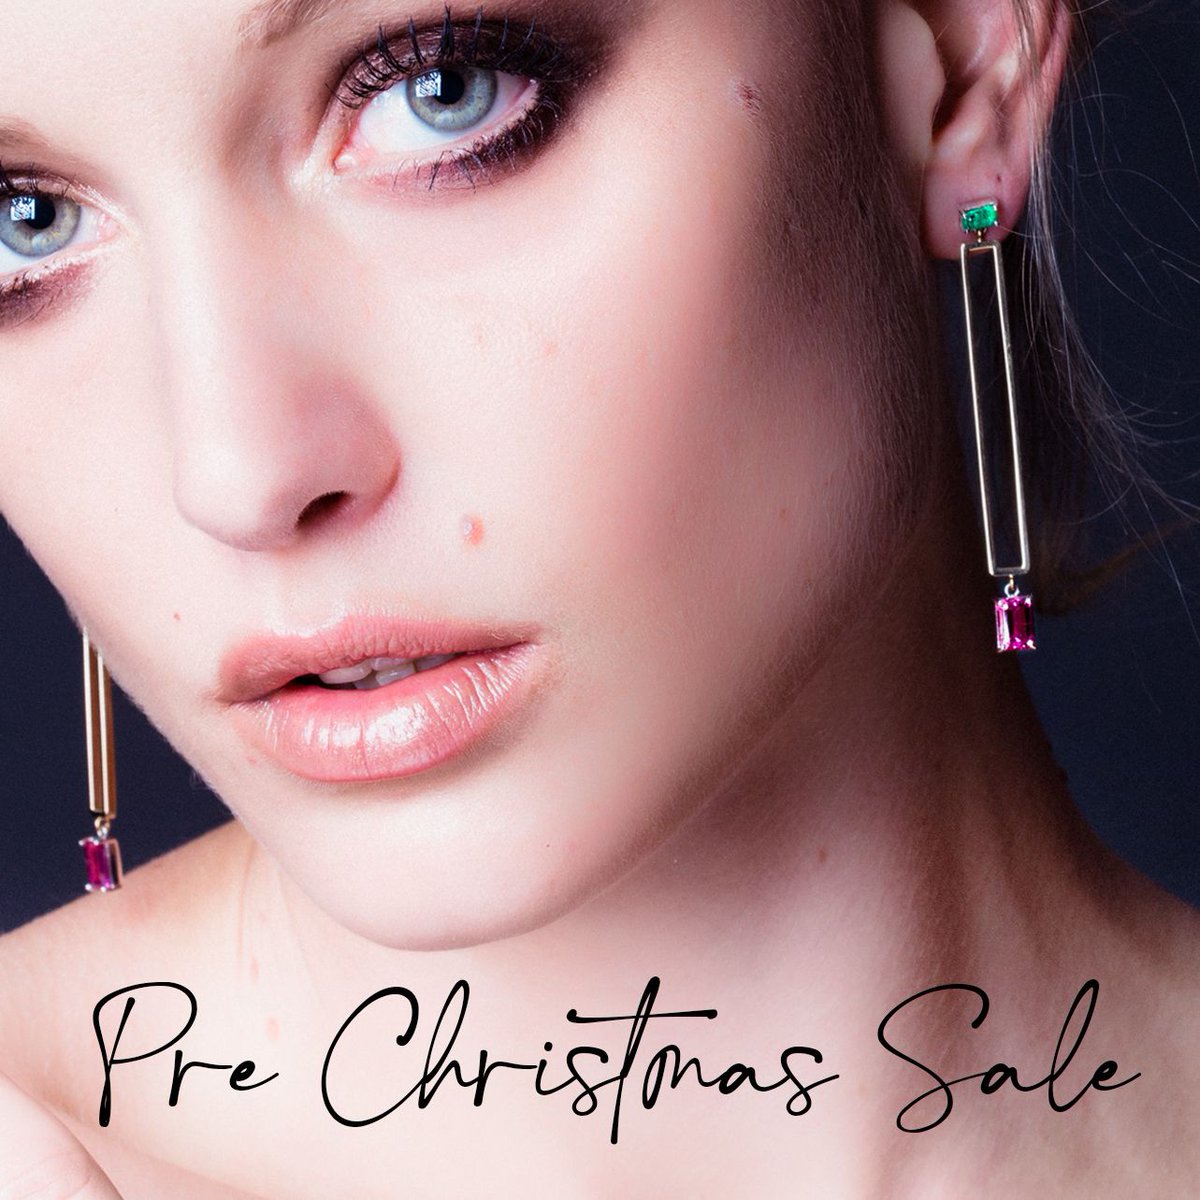 Shop our annual pre Christmas sale and enjoy 20% off a range of exquisite fine jewellery lovingly handcrafted in Sydney! 🎄🎁
lizunova.com/collections/sa…

#australianjeweller #sydneyjeweller #shopsmall #australianmade #sydneylocal